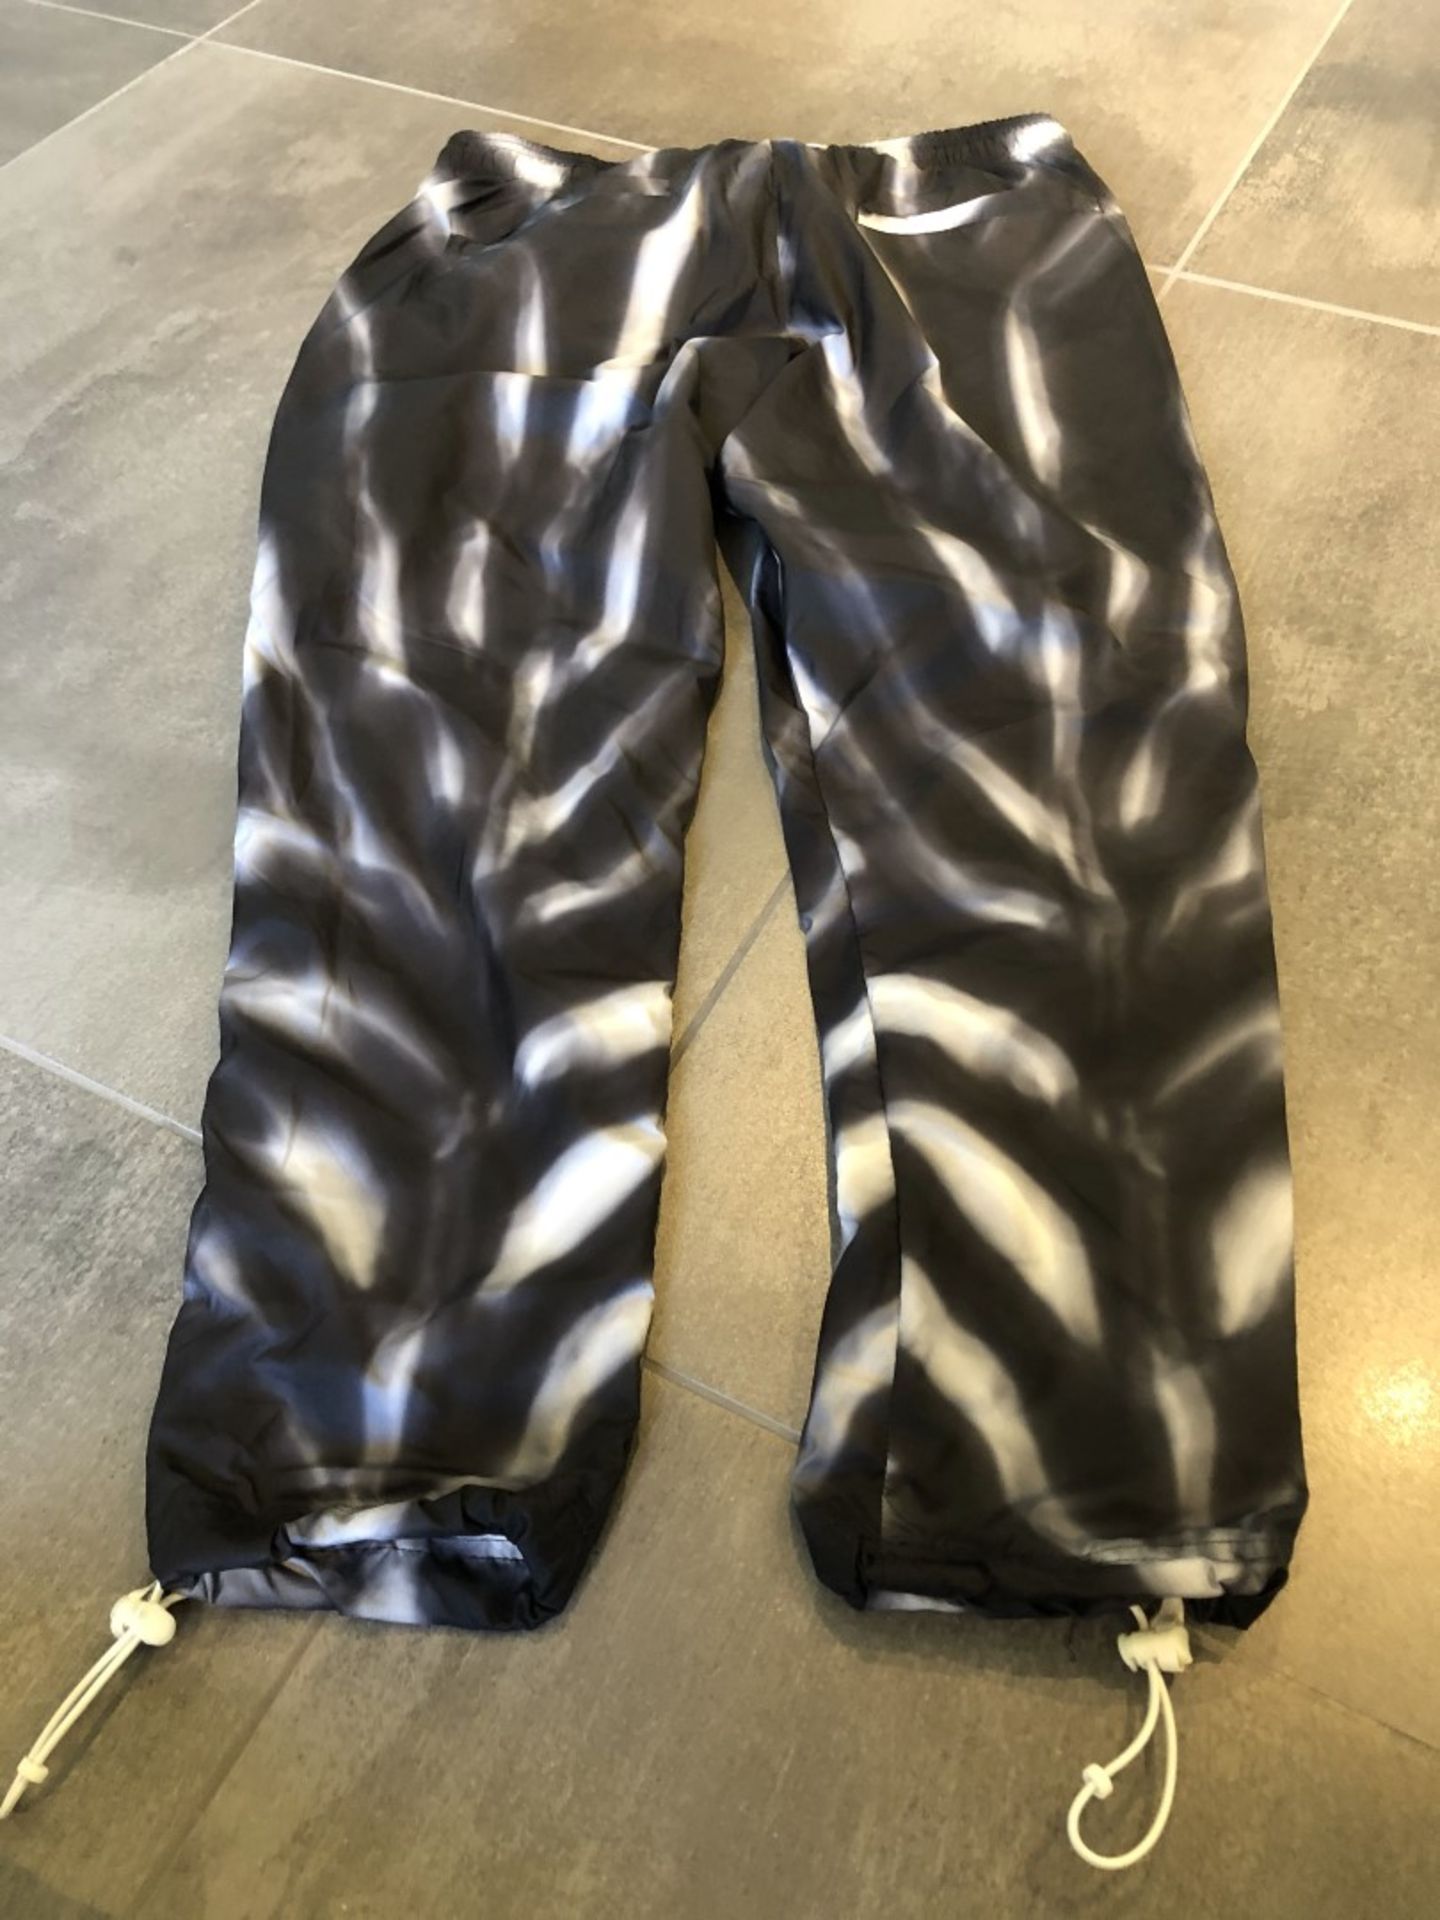 1 x Pair Of Men's Genuine Nike 'Air Fear Of God' Tracksuit Bottoms - Size (EU/UK): L/L - - Image 4 of 6